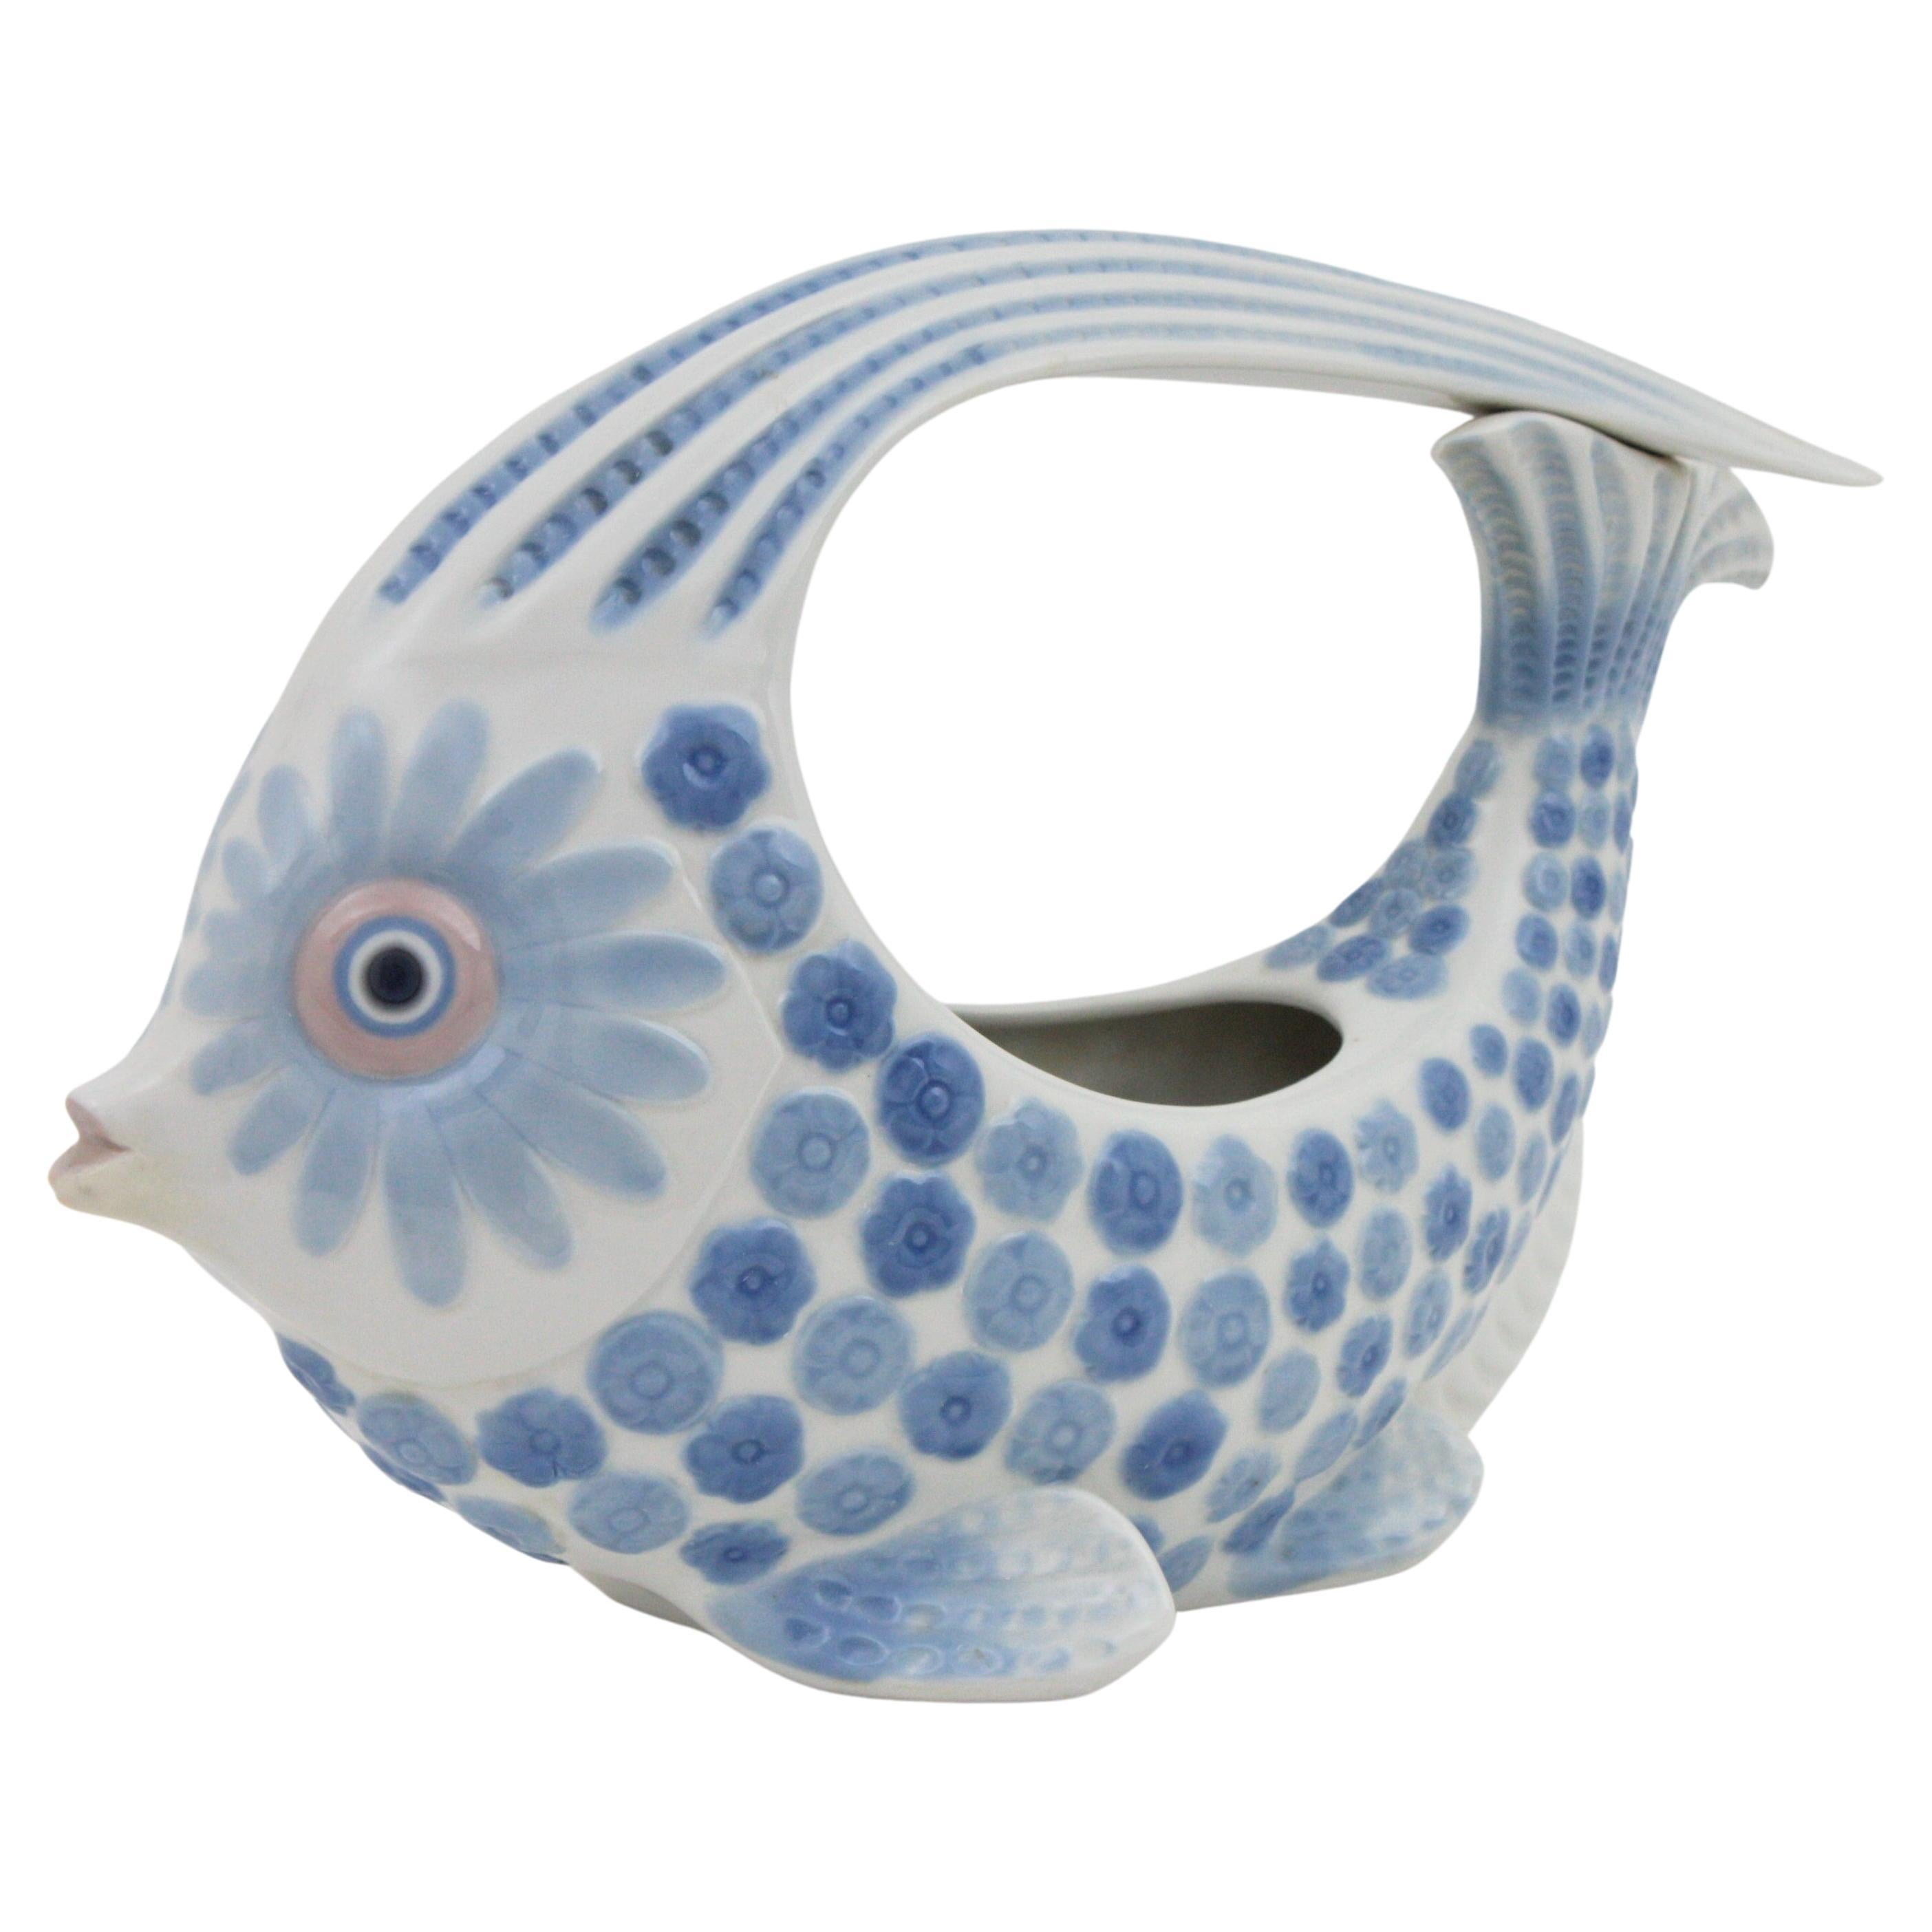 A beautiful colorful porcelain fish figure centerpiece or vase designed by Vicente Martinez and manufactured by Lladró.
It also can be used as a planter.
The design and the blue tones make this centerpiece highly decorative. This piece is in mint